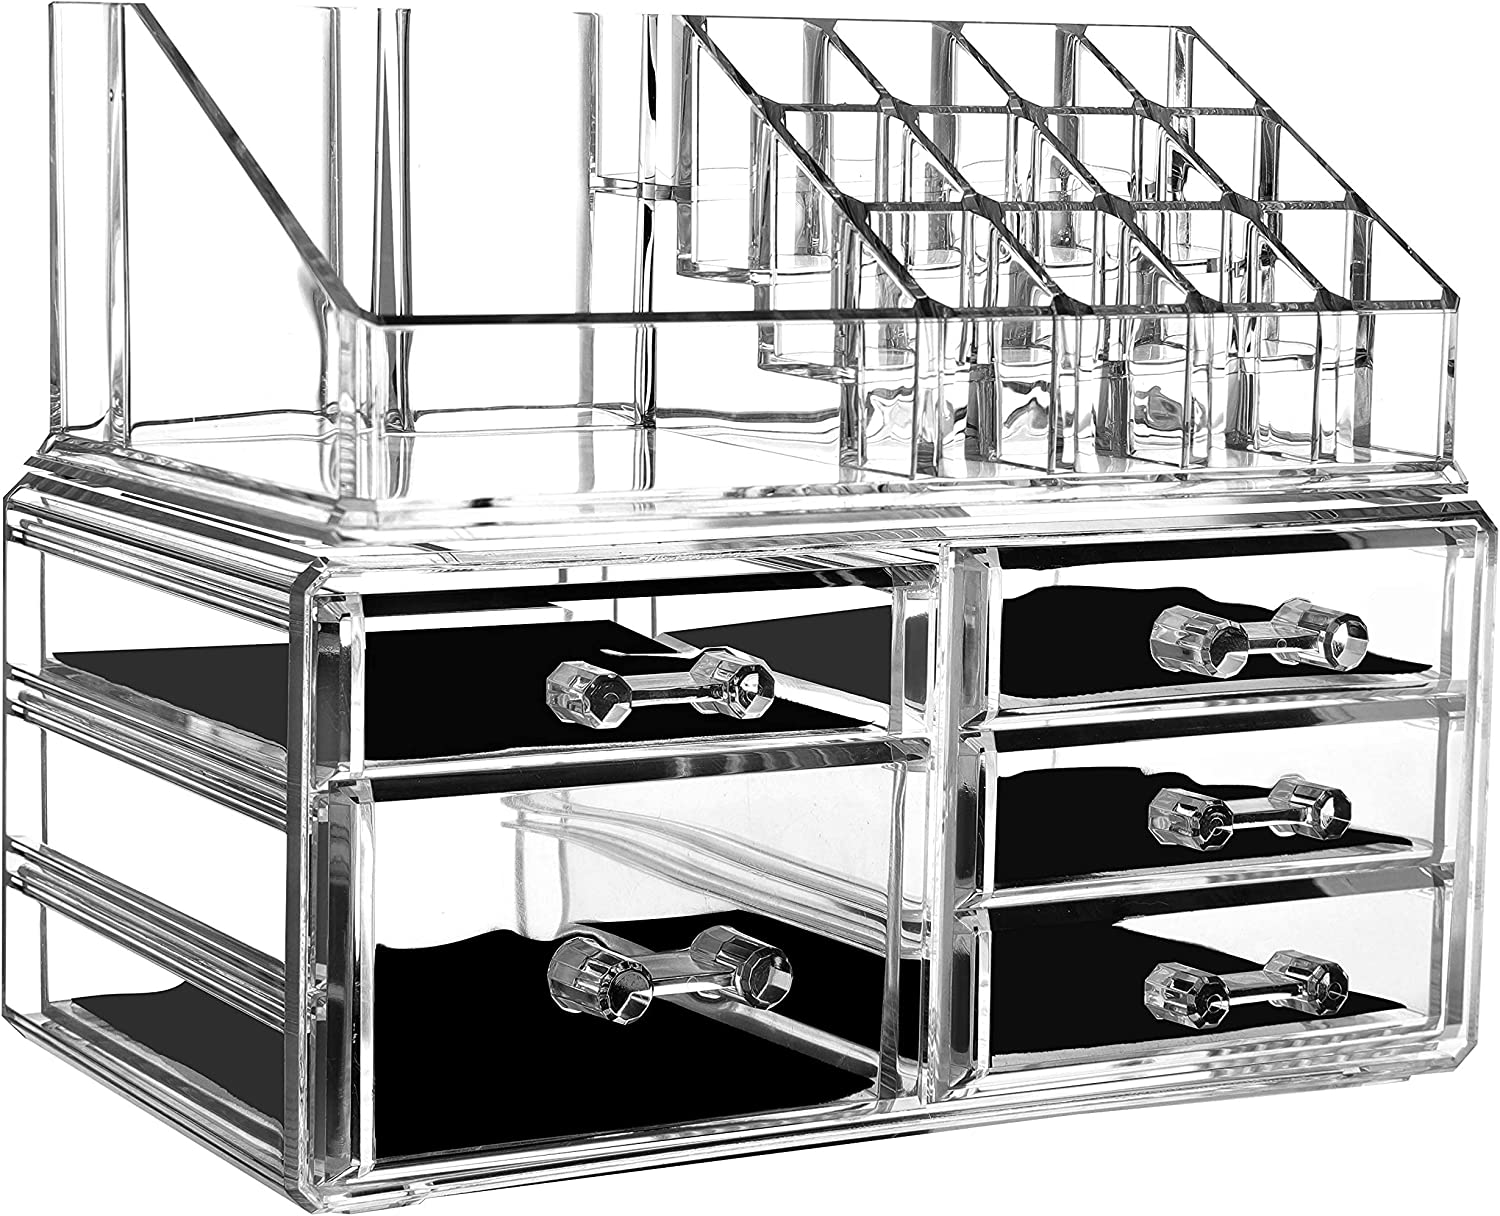 Cq acrylic Stackable Makeup Organizer With 3 Drawers,Acrylic